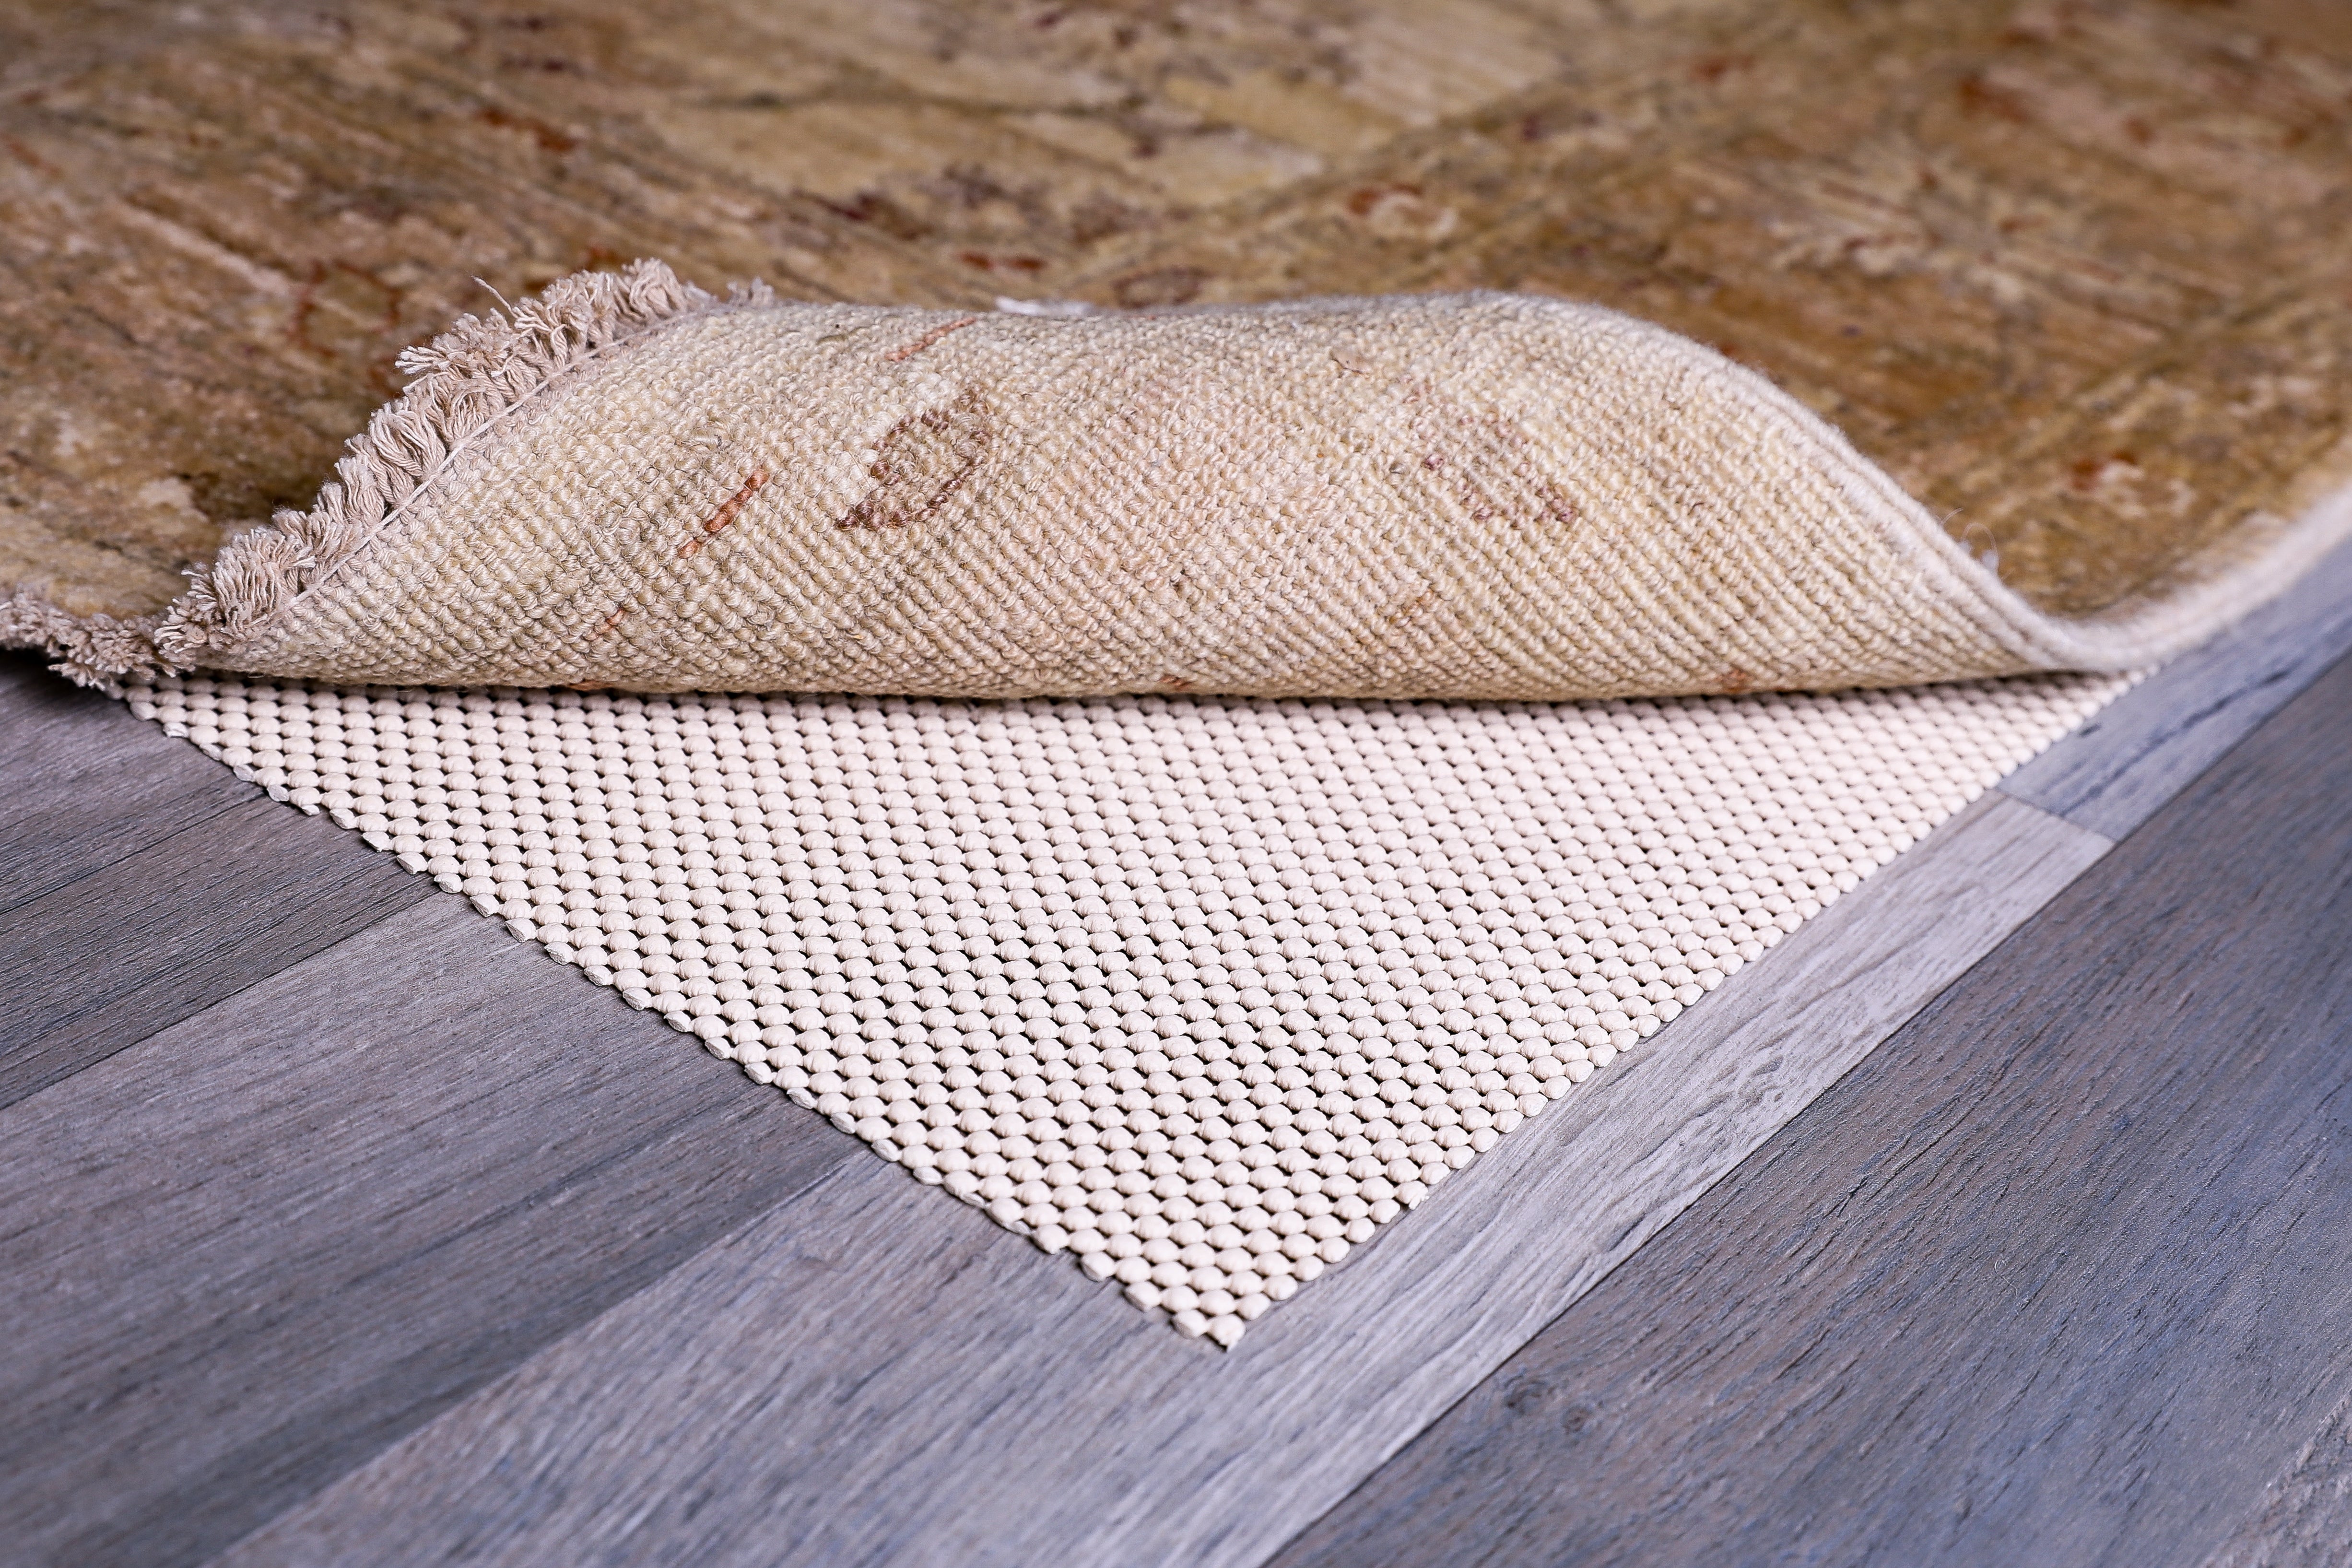 Super Grip Natural Non Slip Rug Pad 3 x 5 ft by Slip-Stop